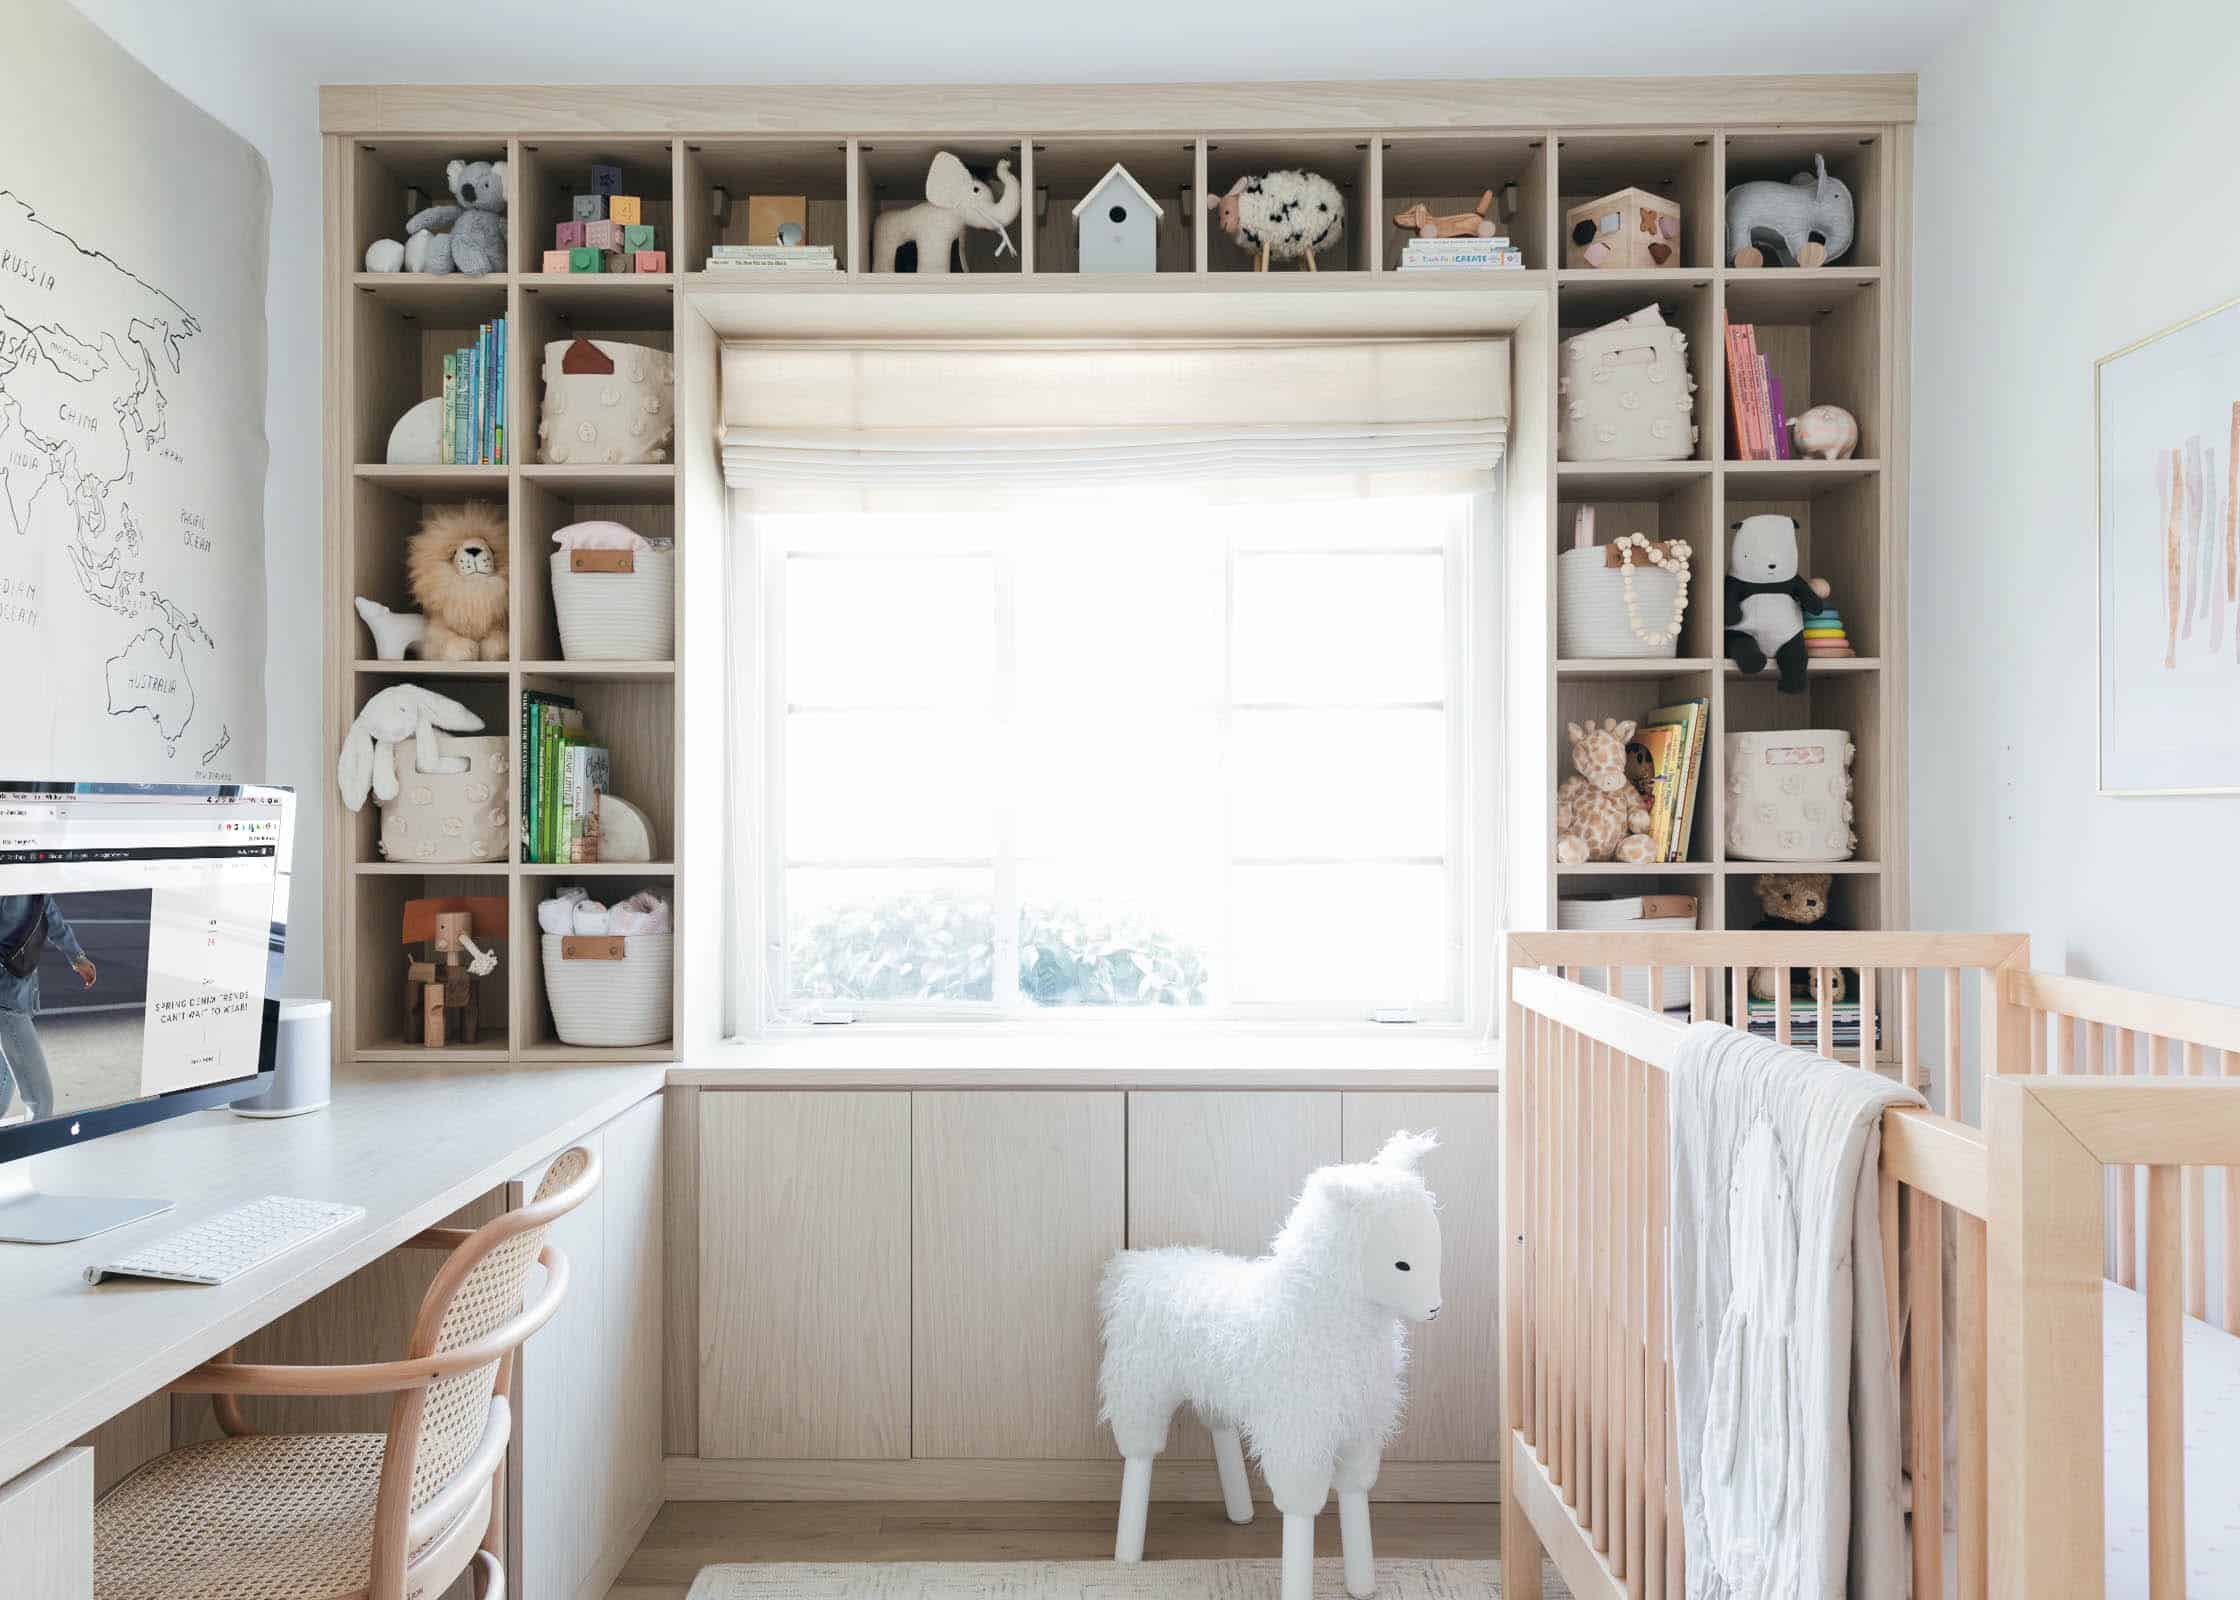 Revamping The Nursery: Home Improvement For Baby's Arrival